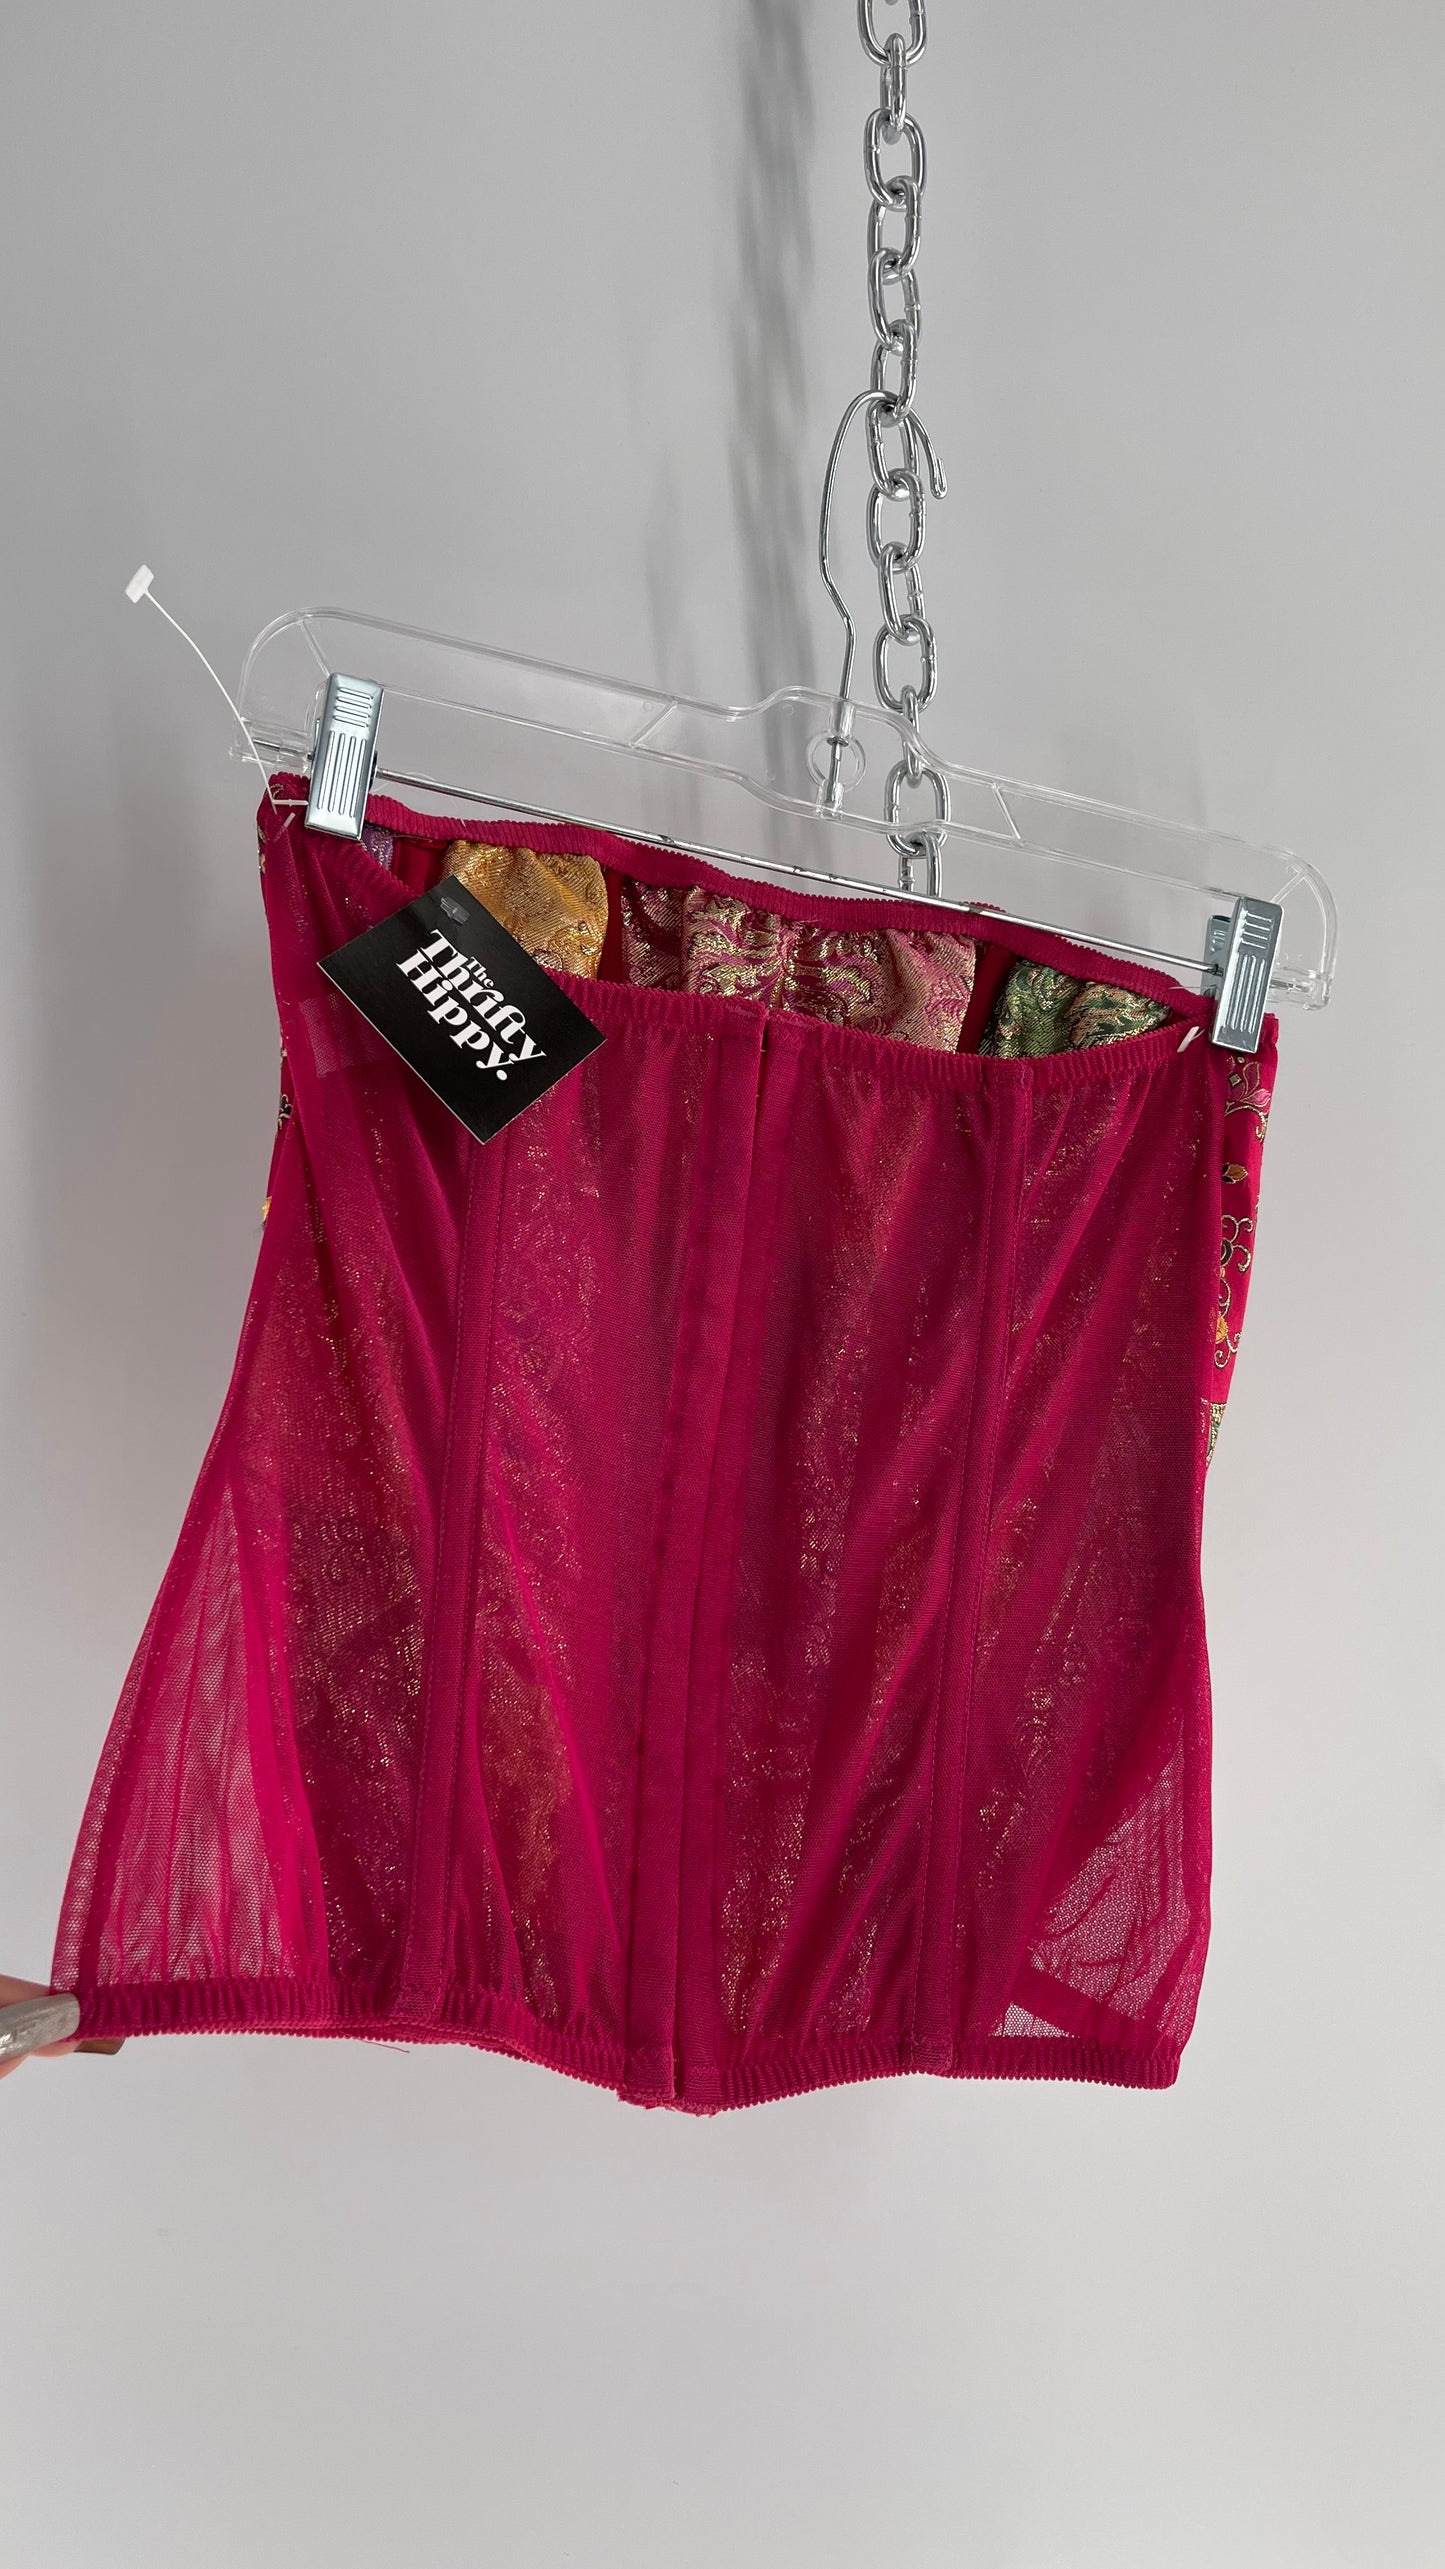 Vintage 1990s HOT Hot Pink Jacquard Metallic Boned Corset with Mesh Back and Hips (Small)